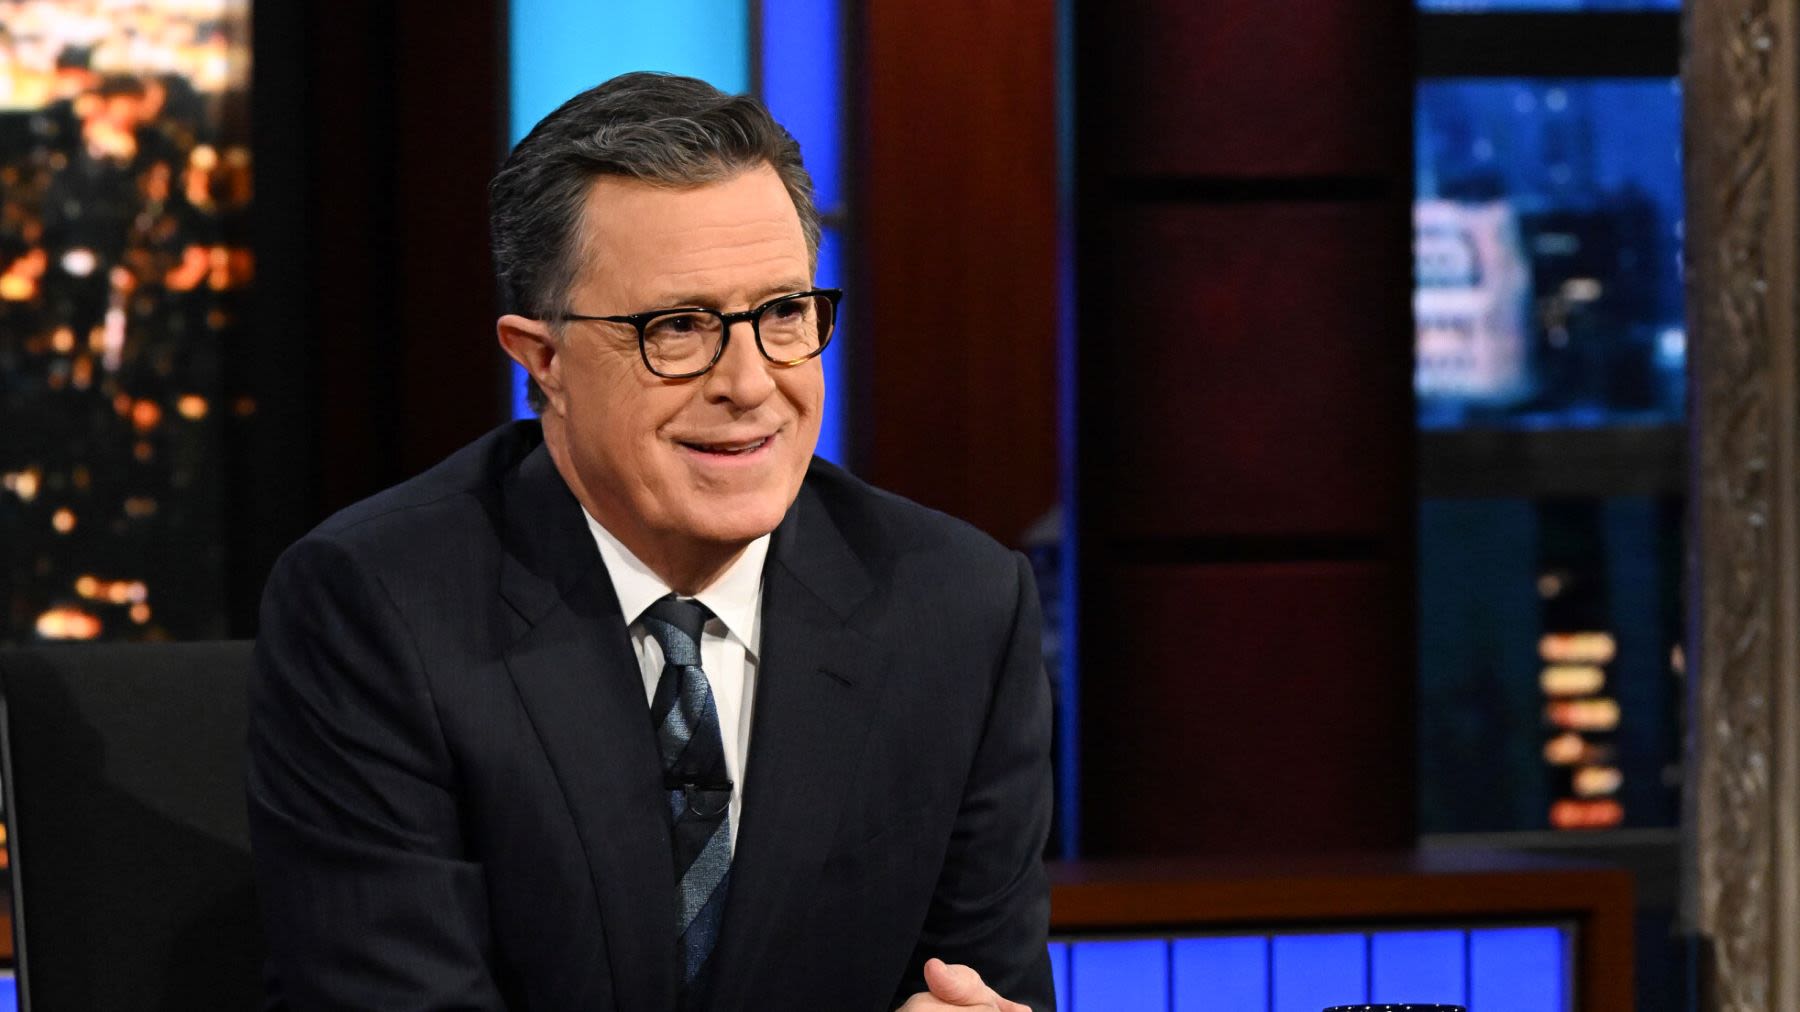 Why The Late Show with Stephen Colbert is not new this week, August 5-9